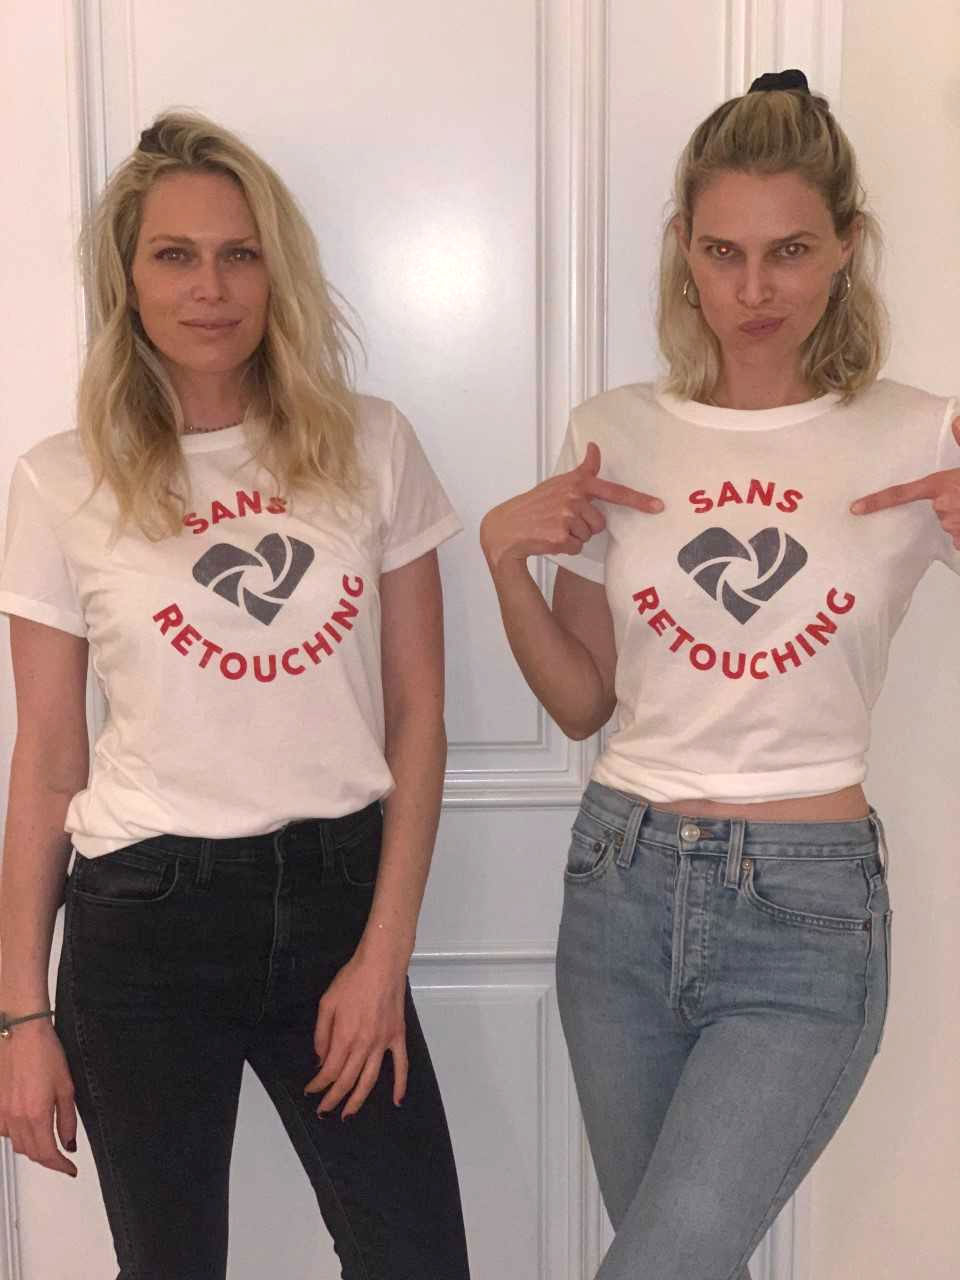 Sara-and-Erin-Foster-Praise-Busy-Mom-Kate-Hudson-for-Her-Hands-On-Parenting2